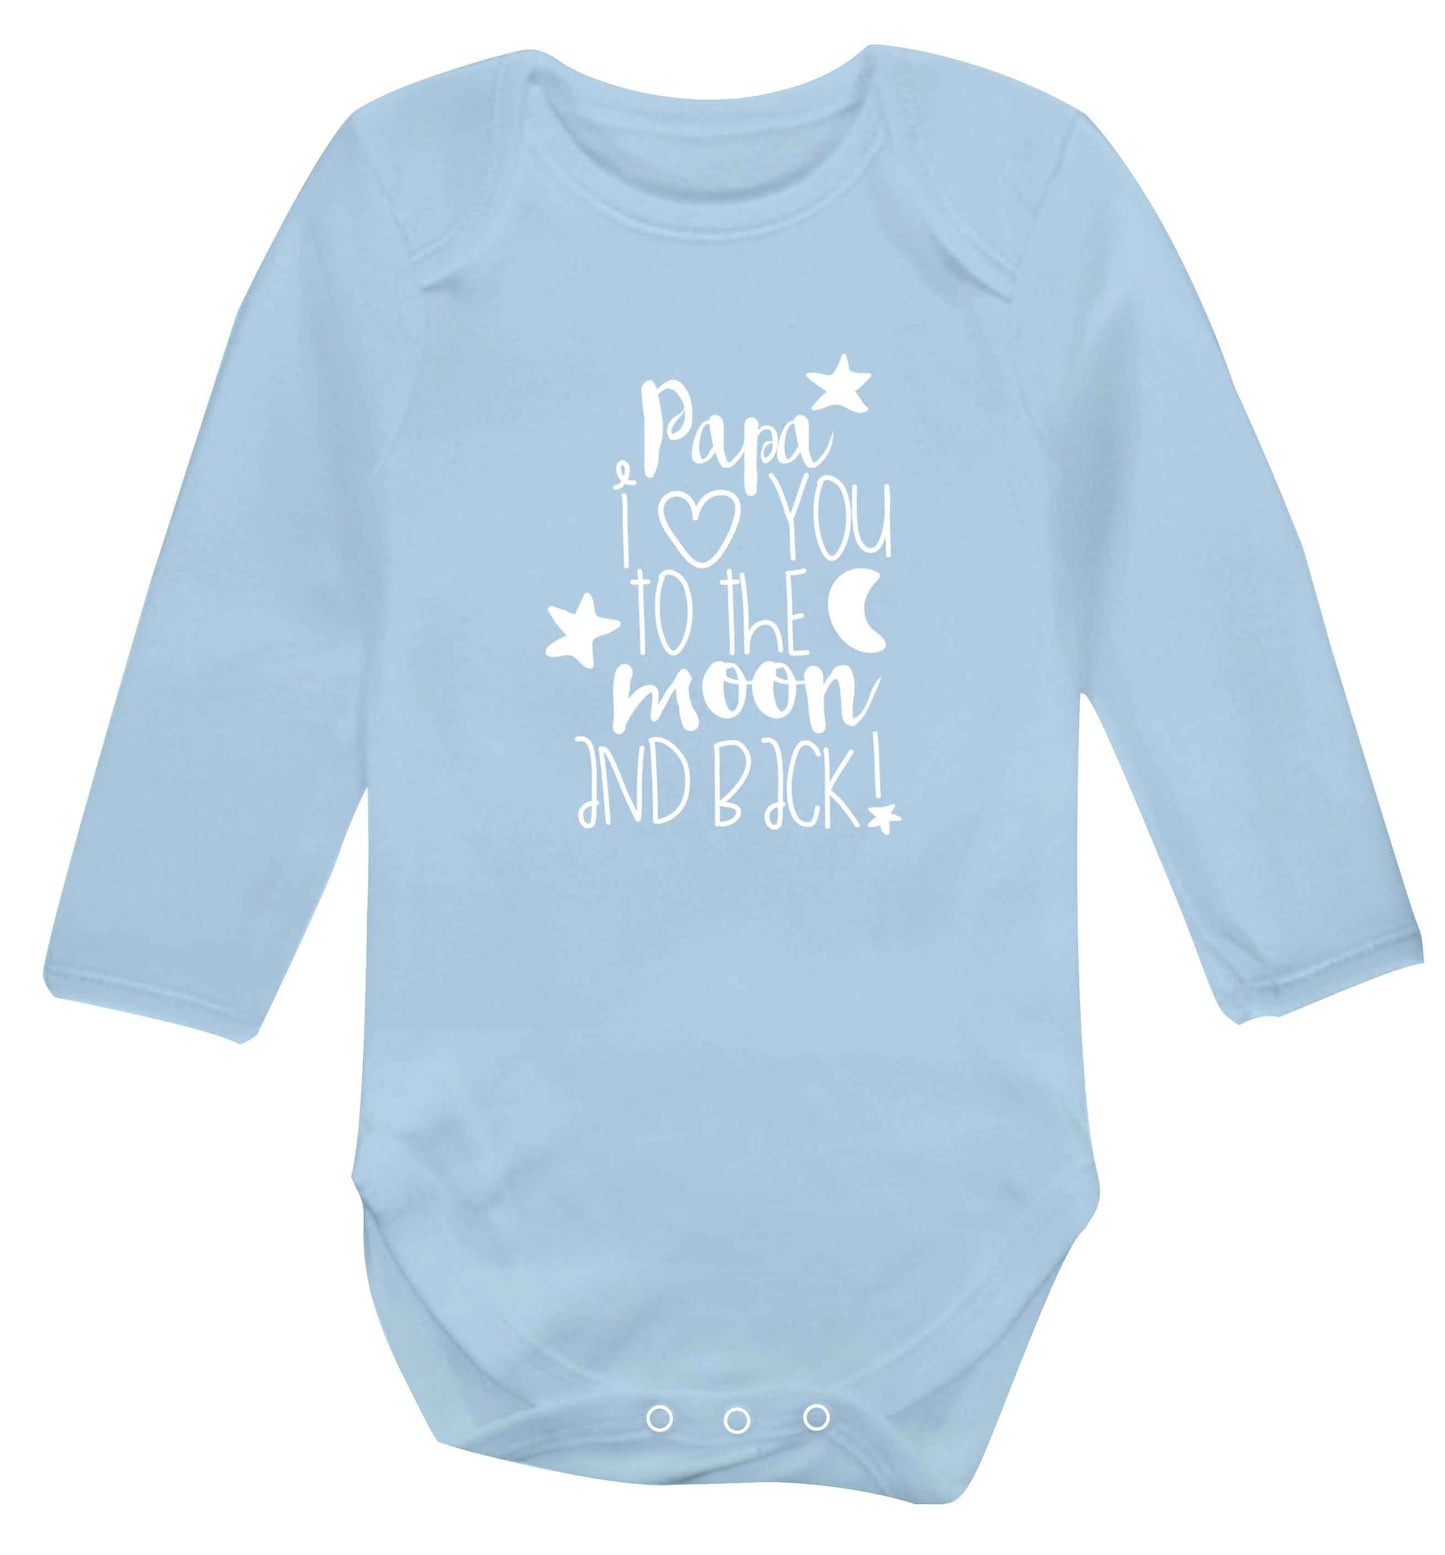 Papa I love you to the moon and back baby vest long sleeved pale blue 6-12 months